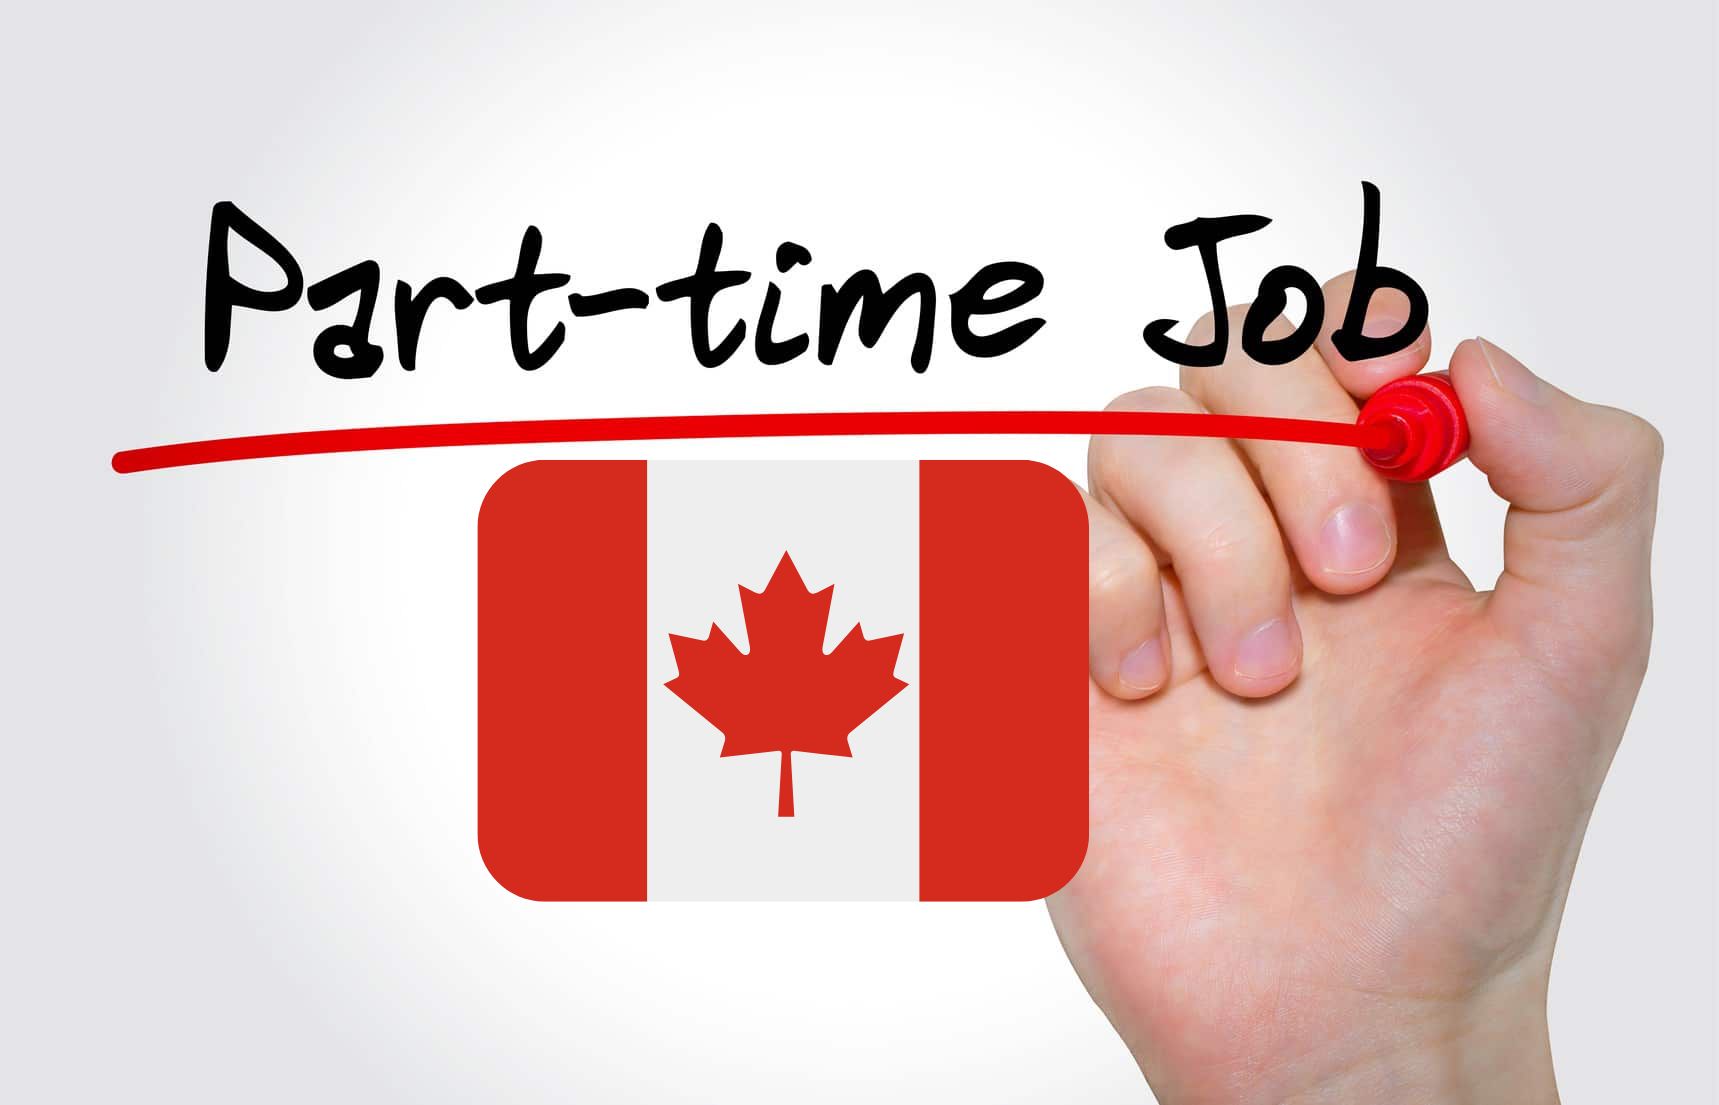 How to Apply for Part-time Jobs in Milton